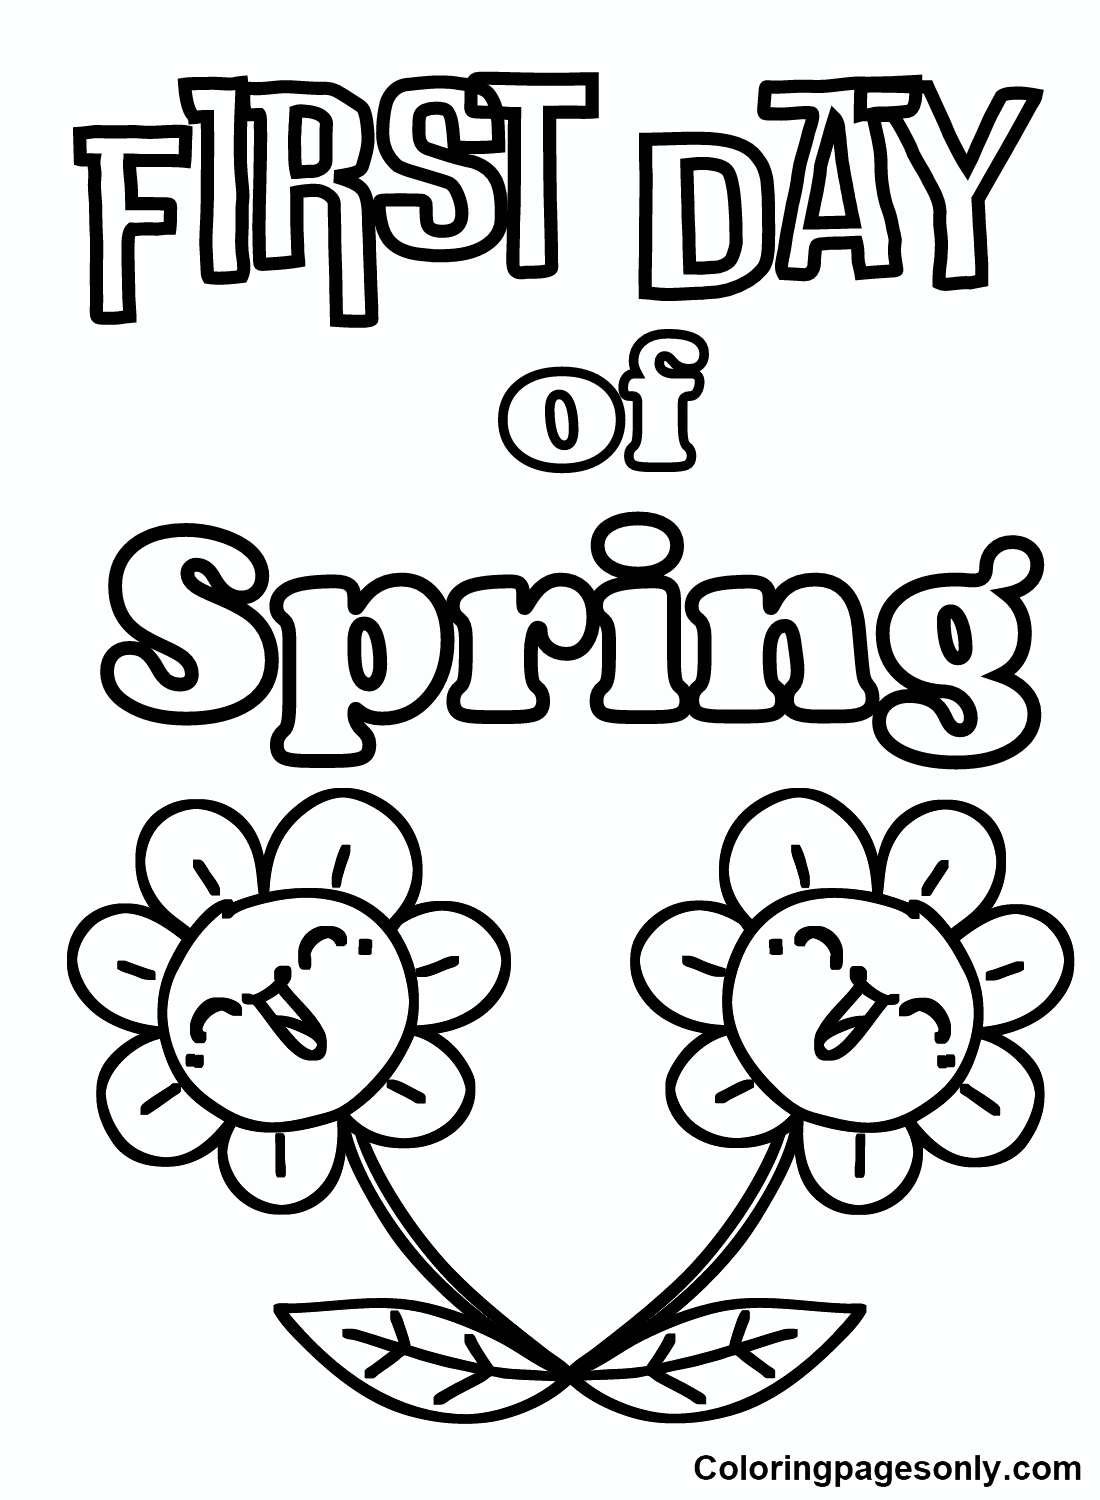 First day of spring coloring pages printable for free download